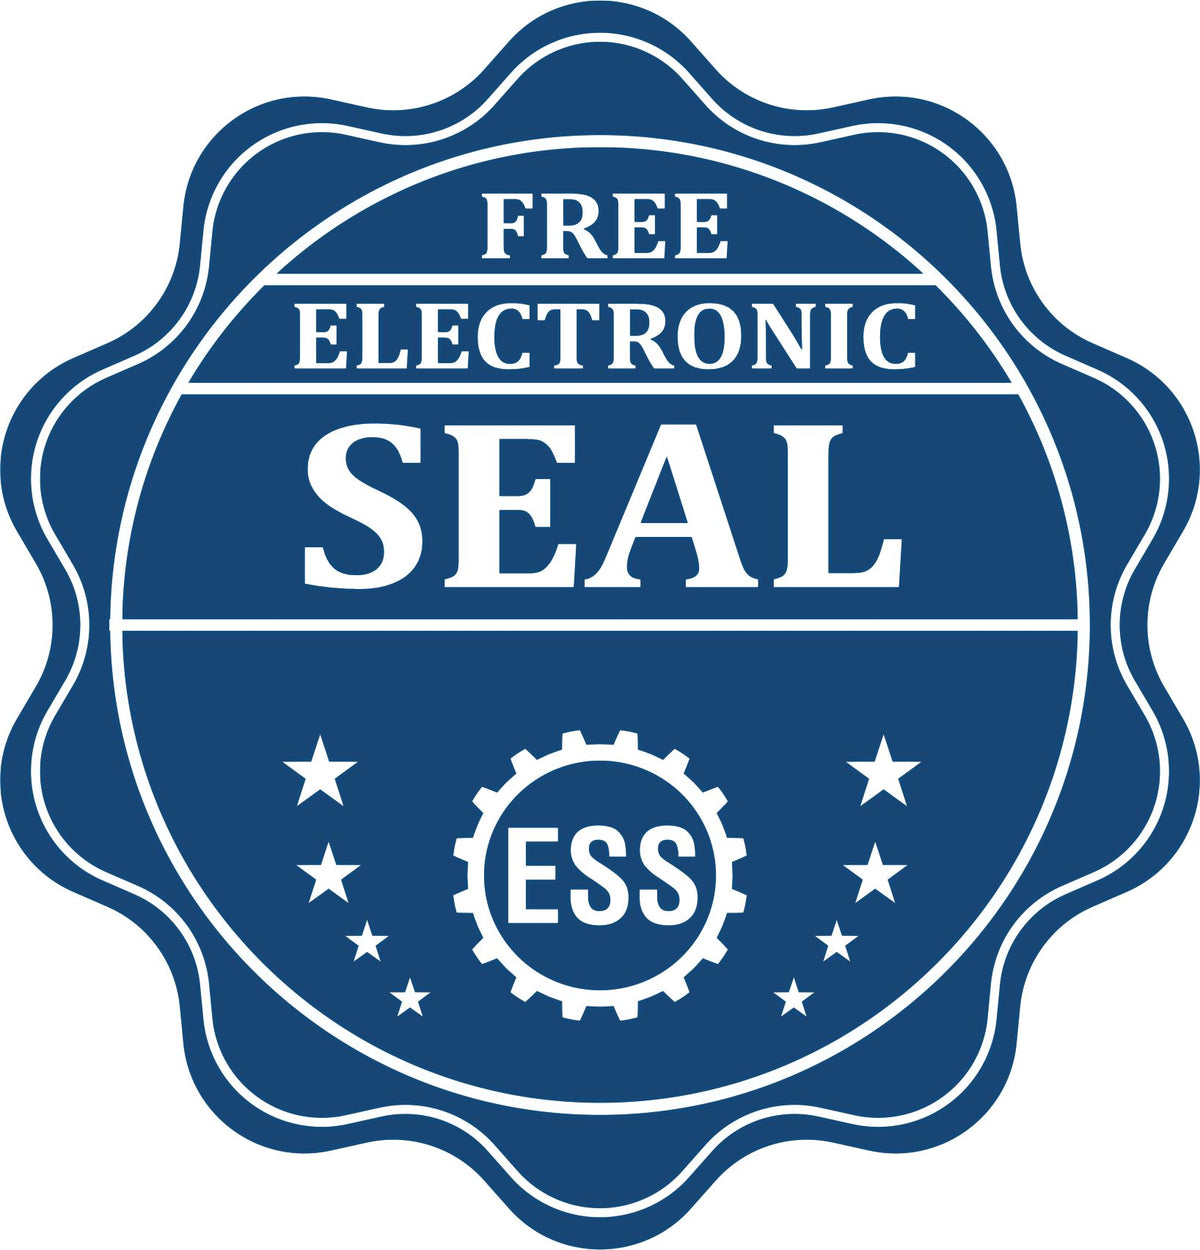 A badge showing a free electronic seal for the Gift North Carolina Land Surveyor Seal with stars and the ESS gear on the emblem.